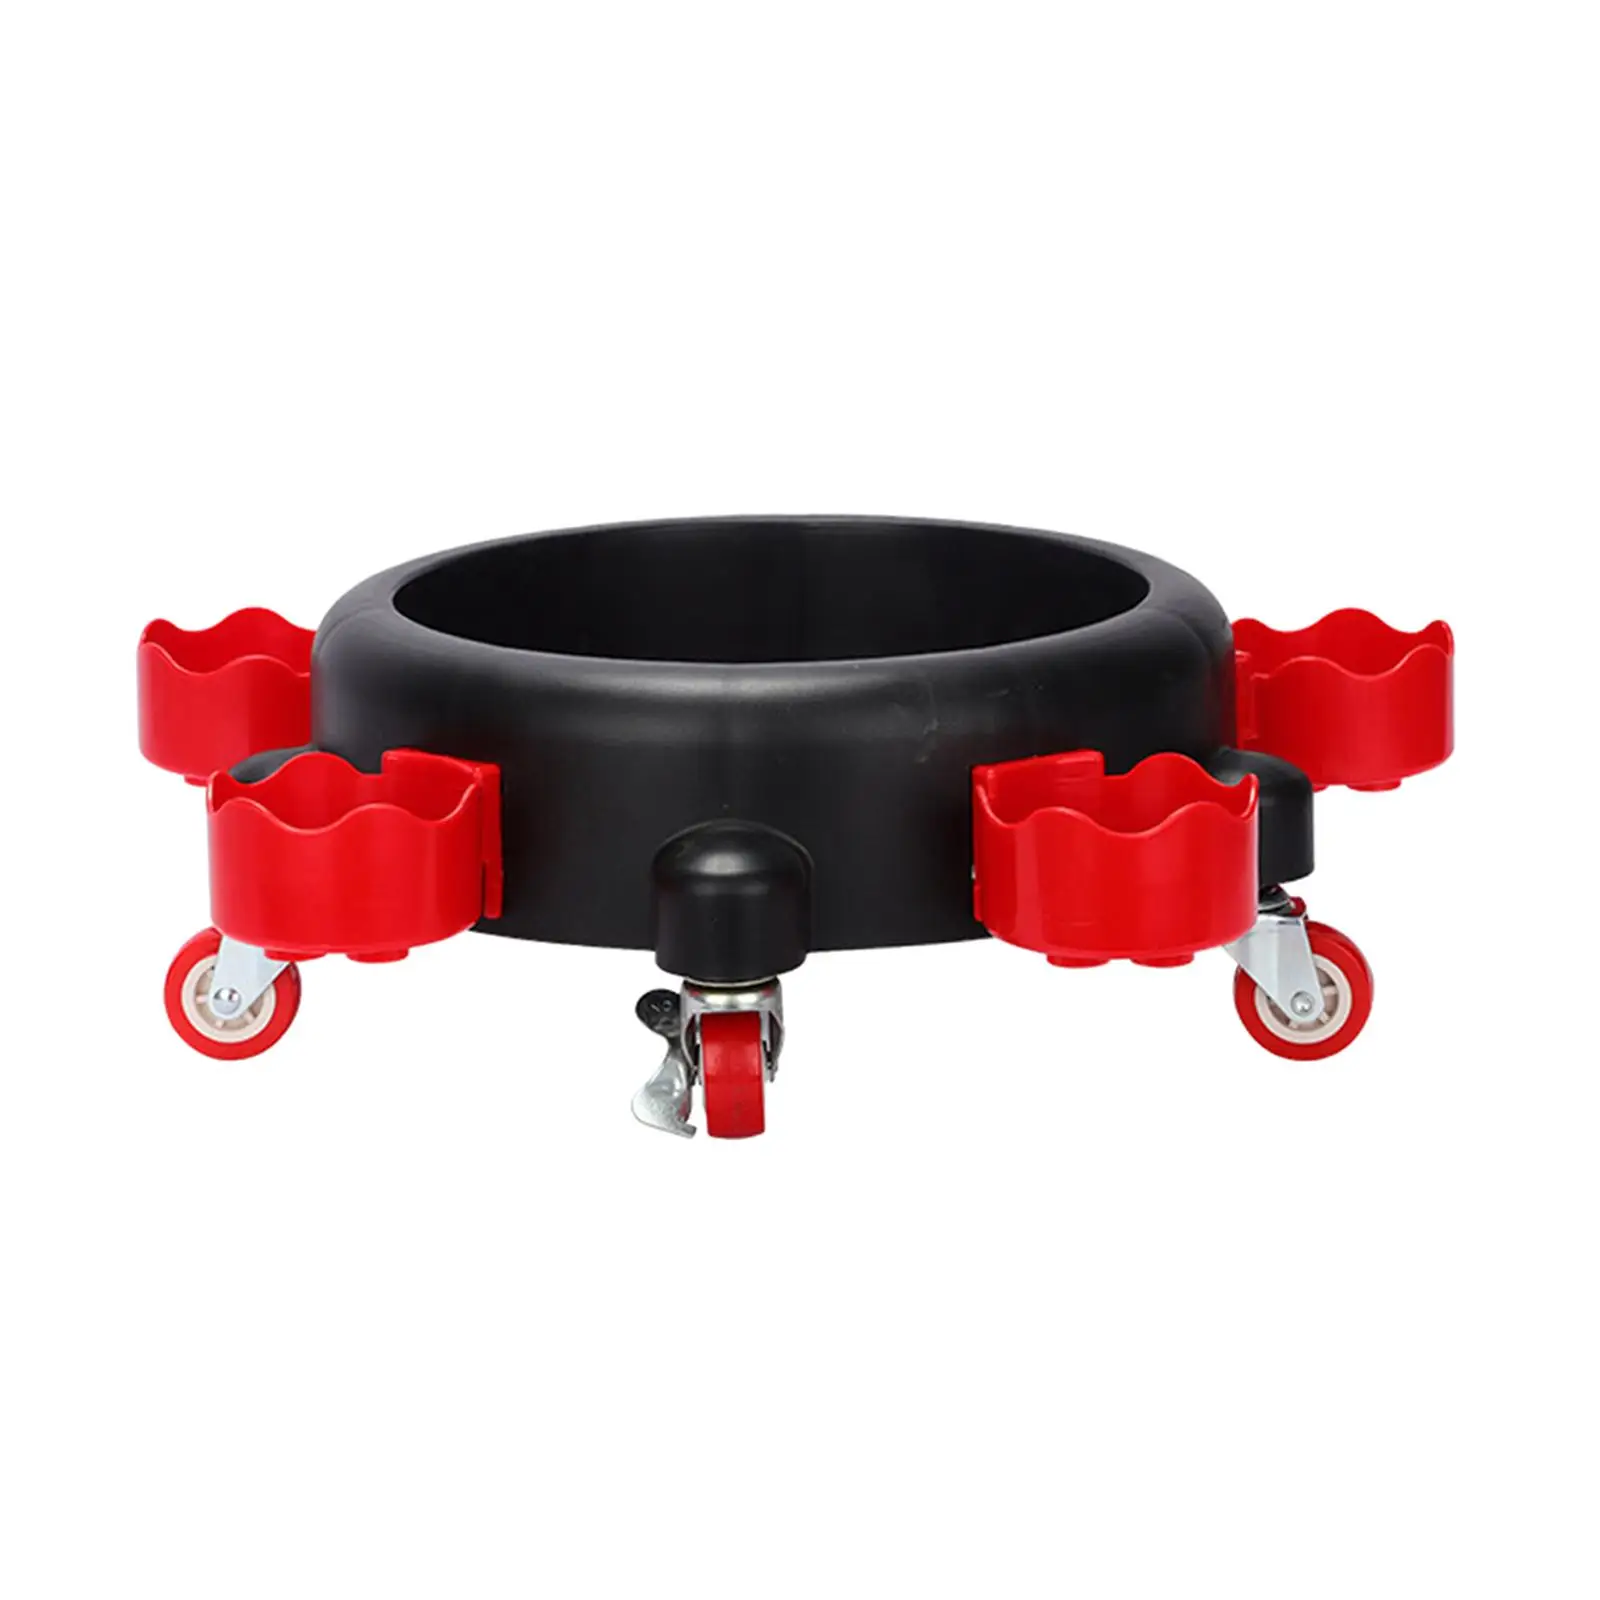 Bucket Dolly Durable Car Wash Bucket Base Pulley for Car Washing Detailing Car Beauty Wash Detailing Caddy Building Workers